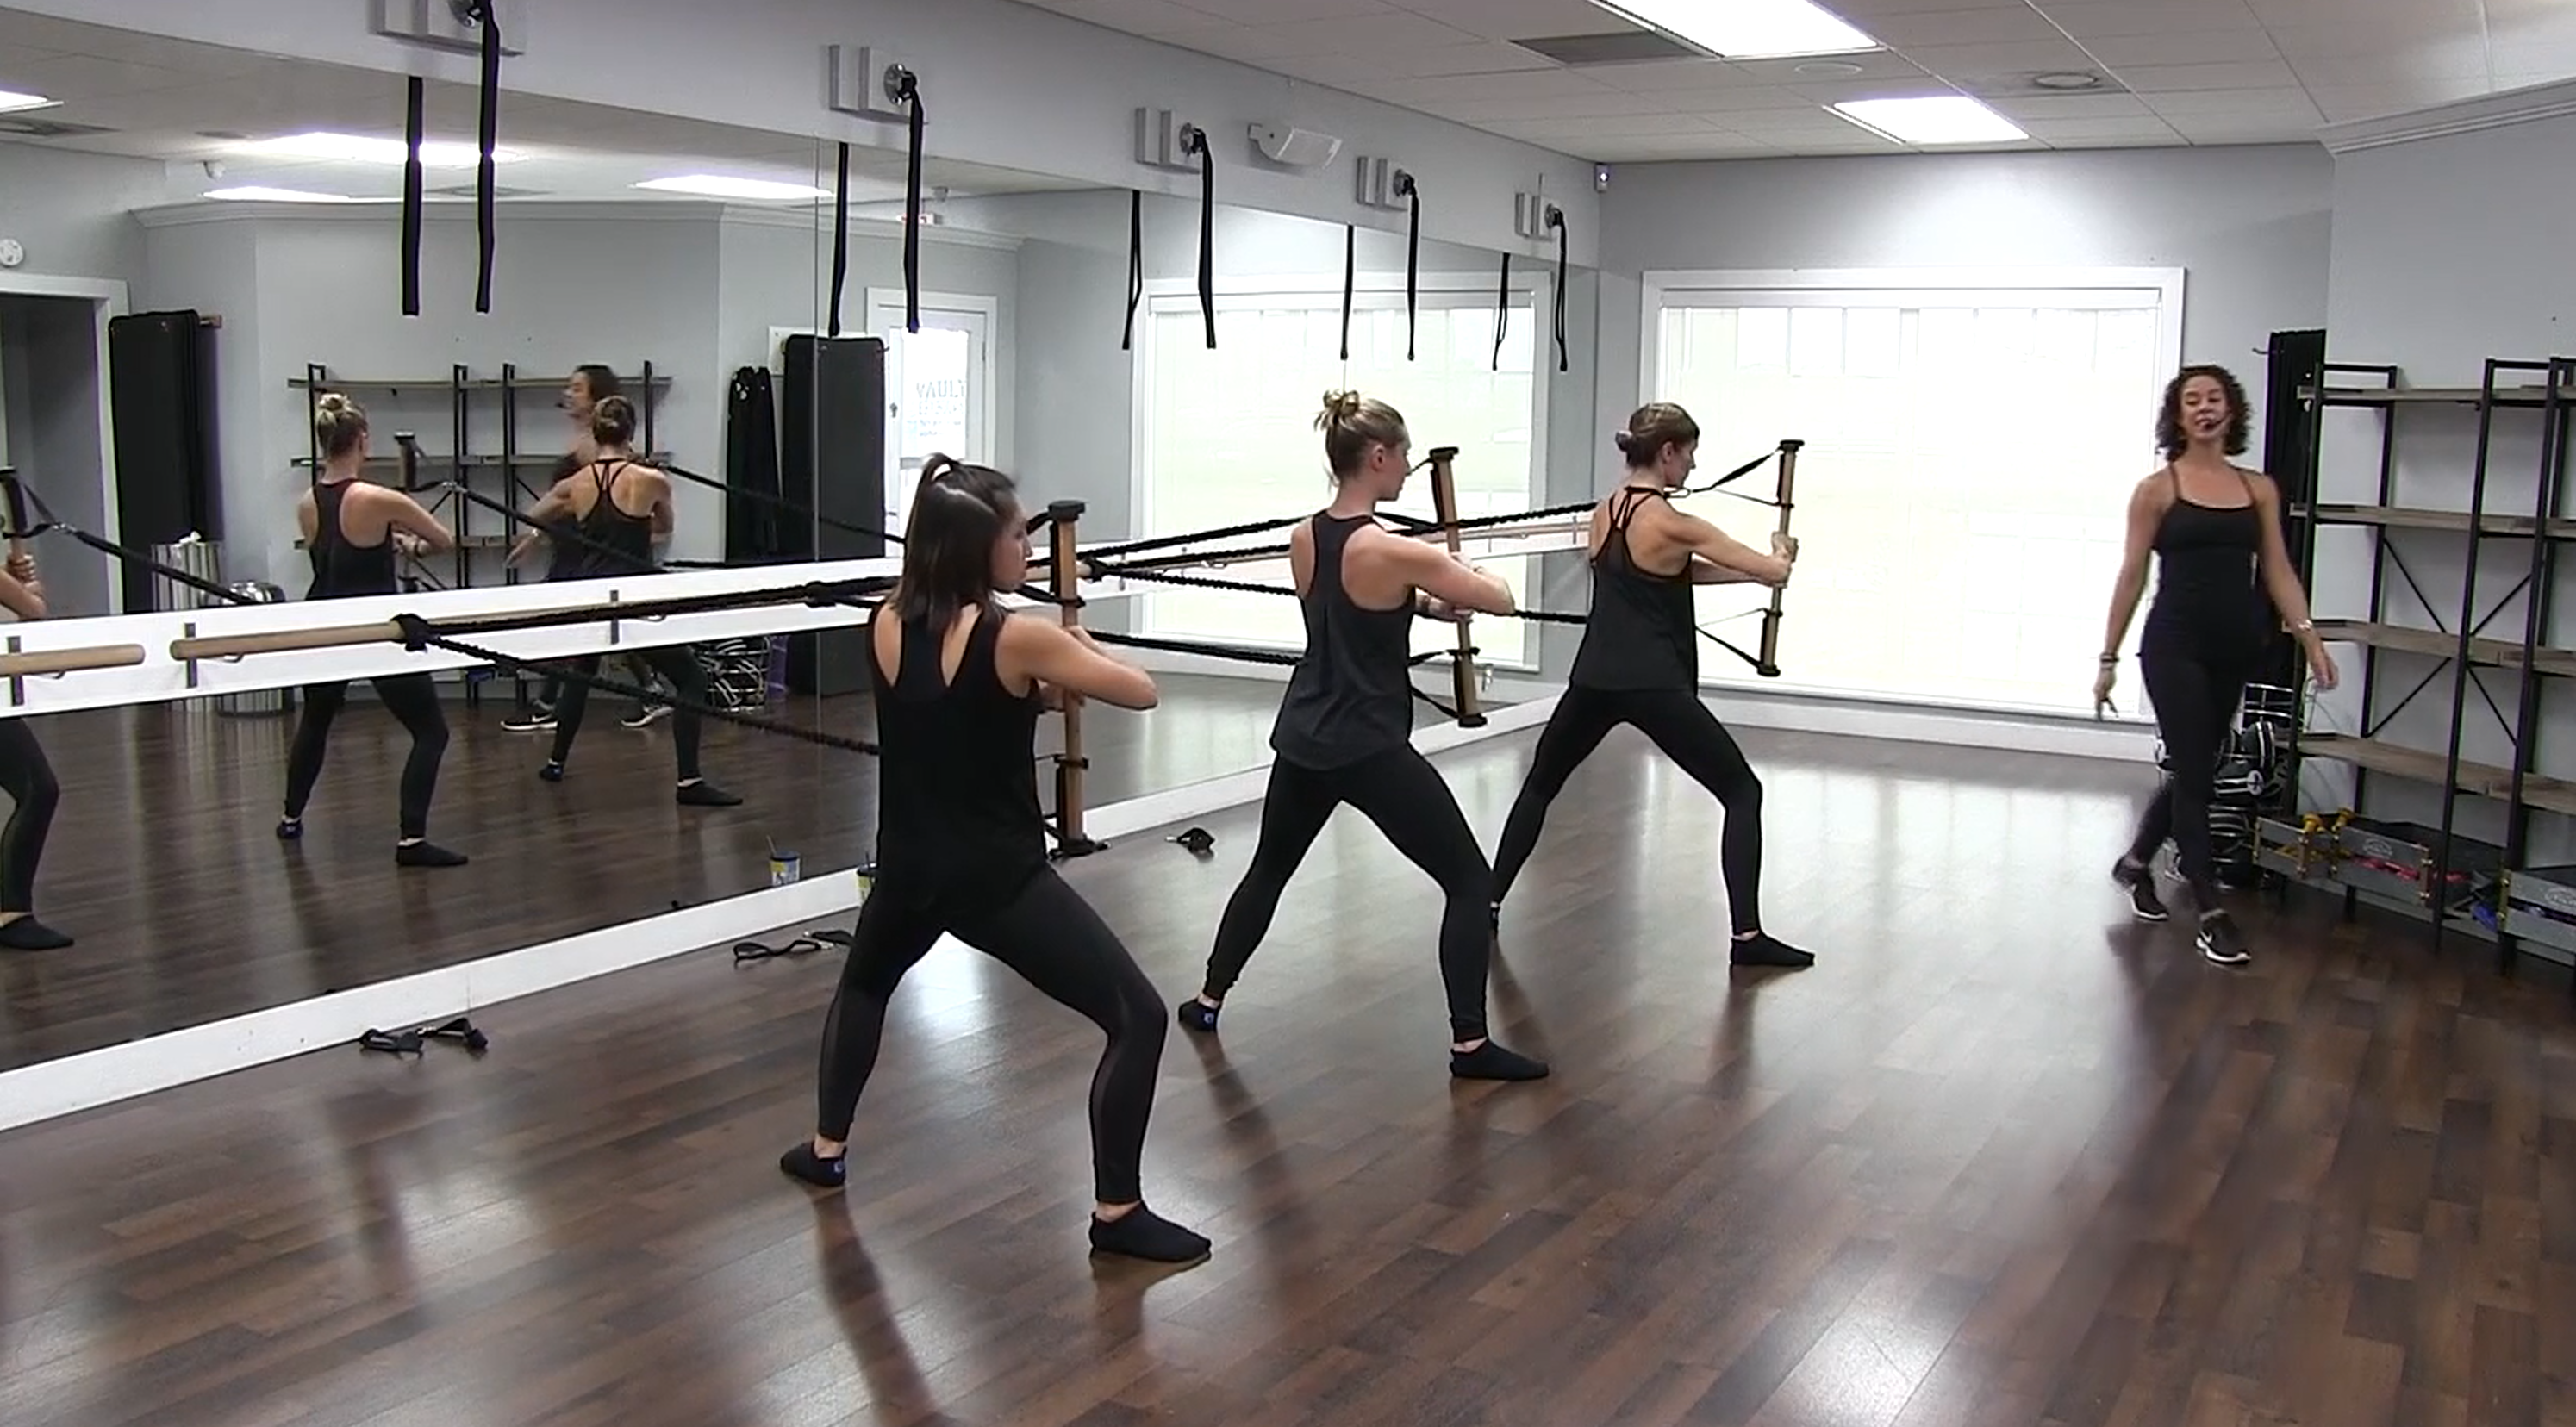 You are currently viewing Vault Barre Workout 2 with Lauren